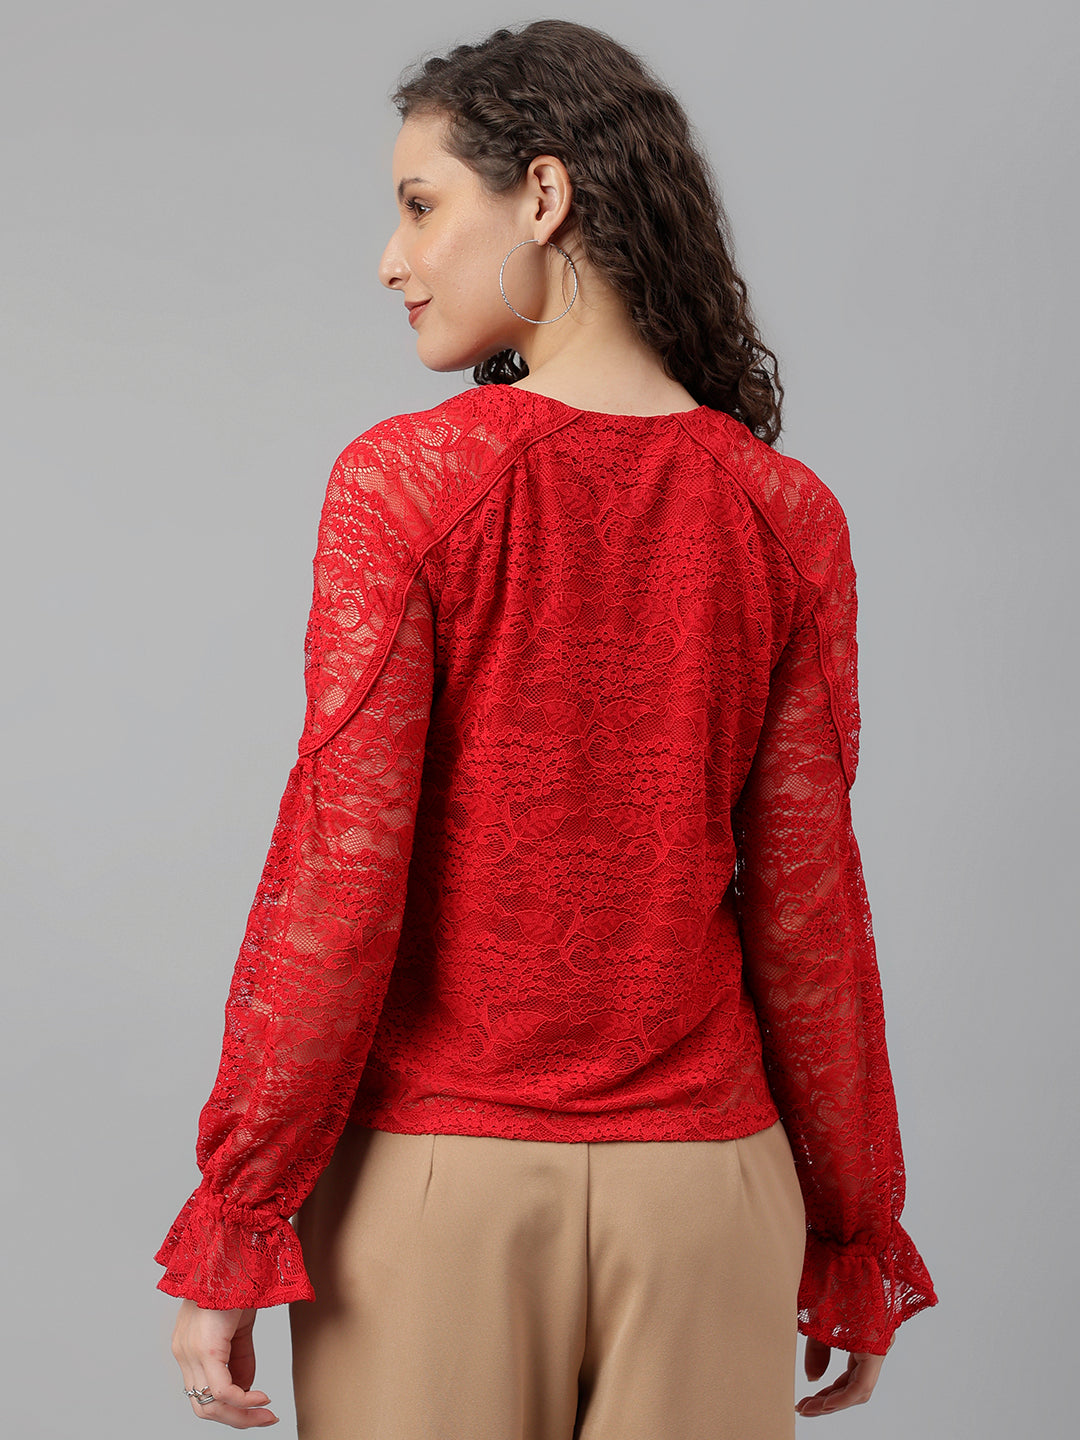 Red Full Sleeve Solid Knit Top